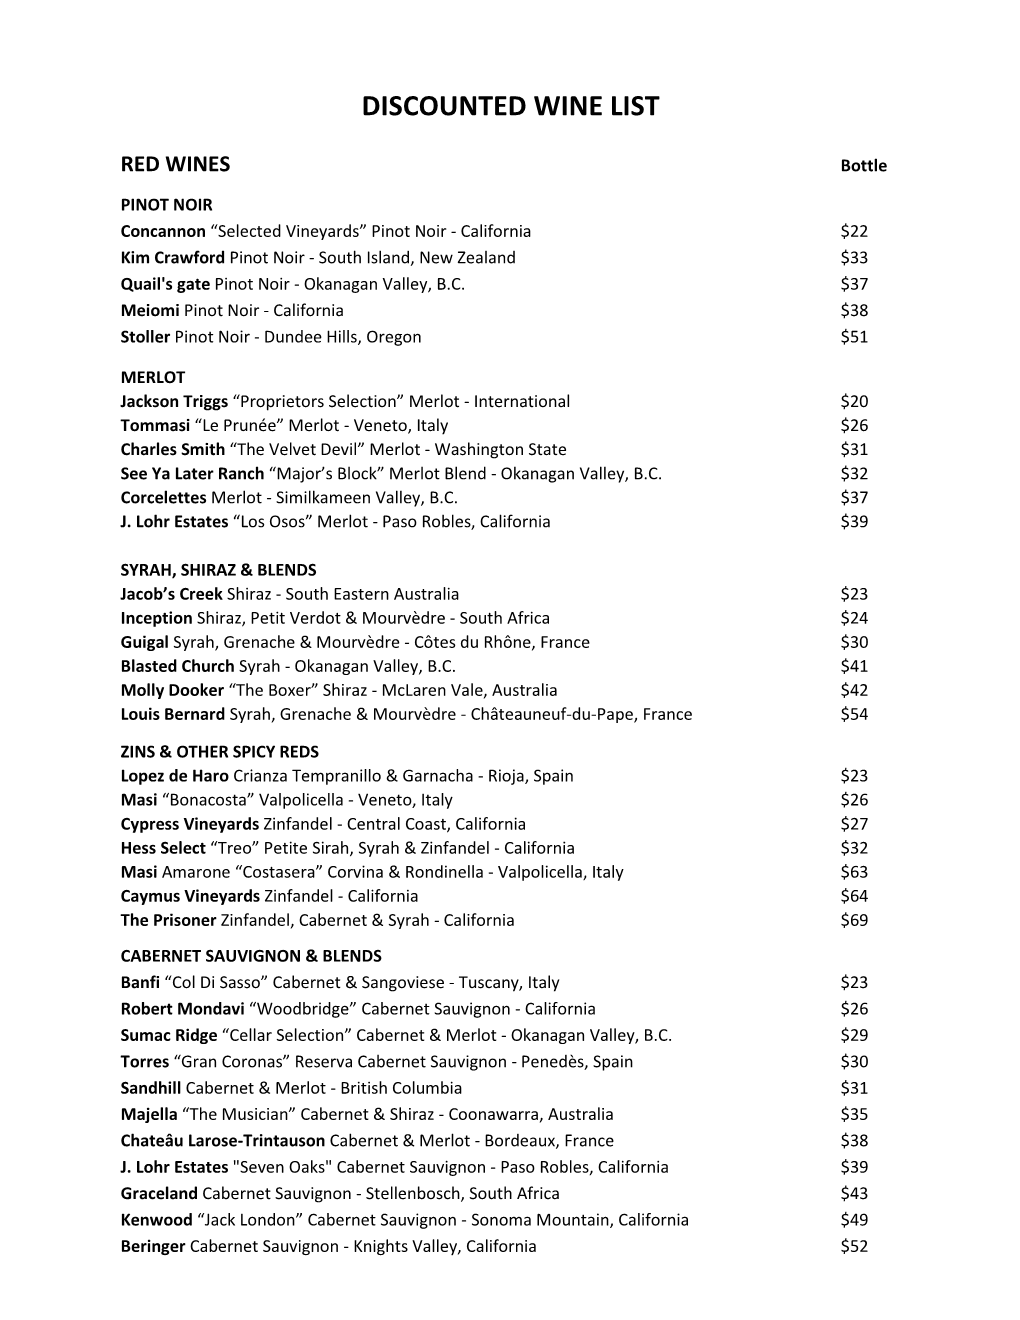 Discounted Wine List